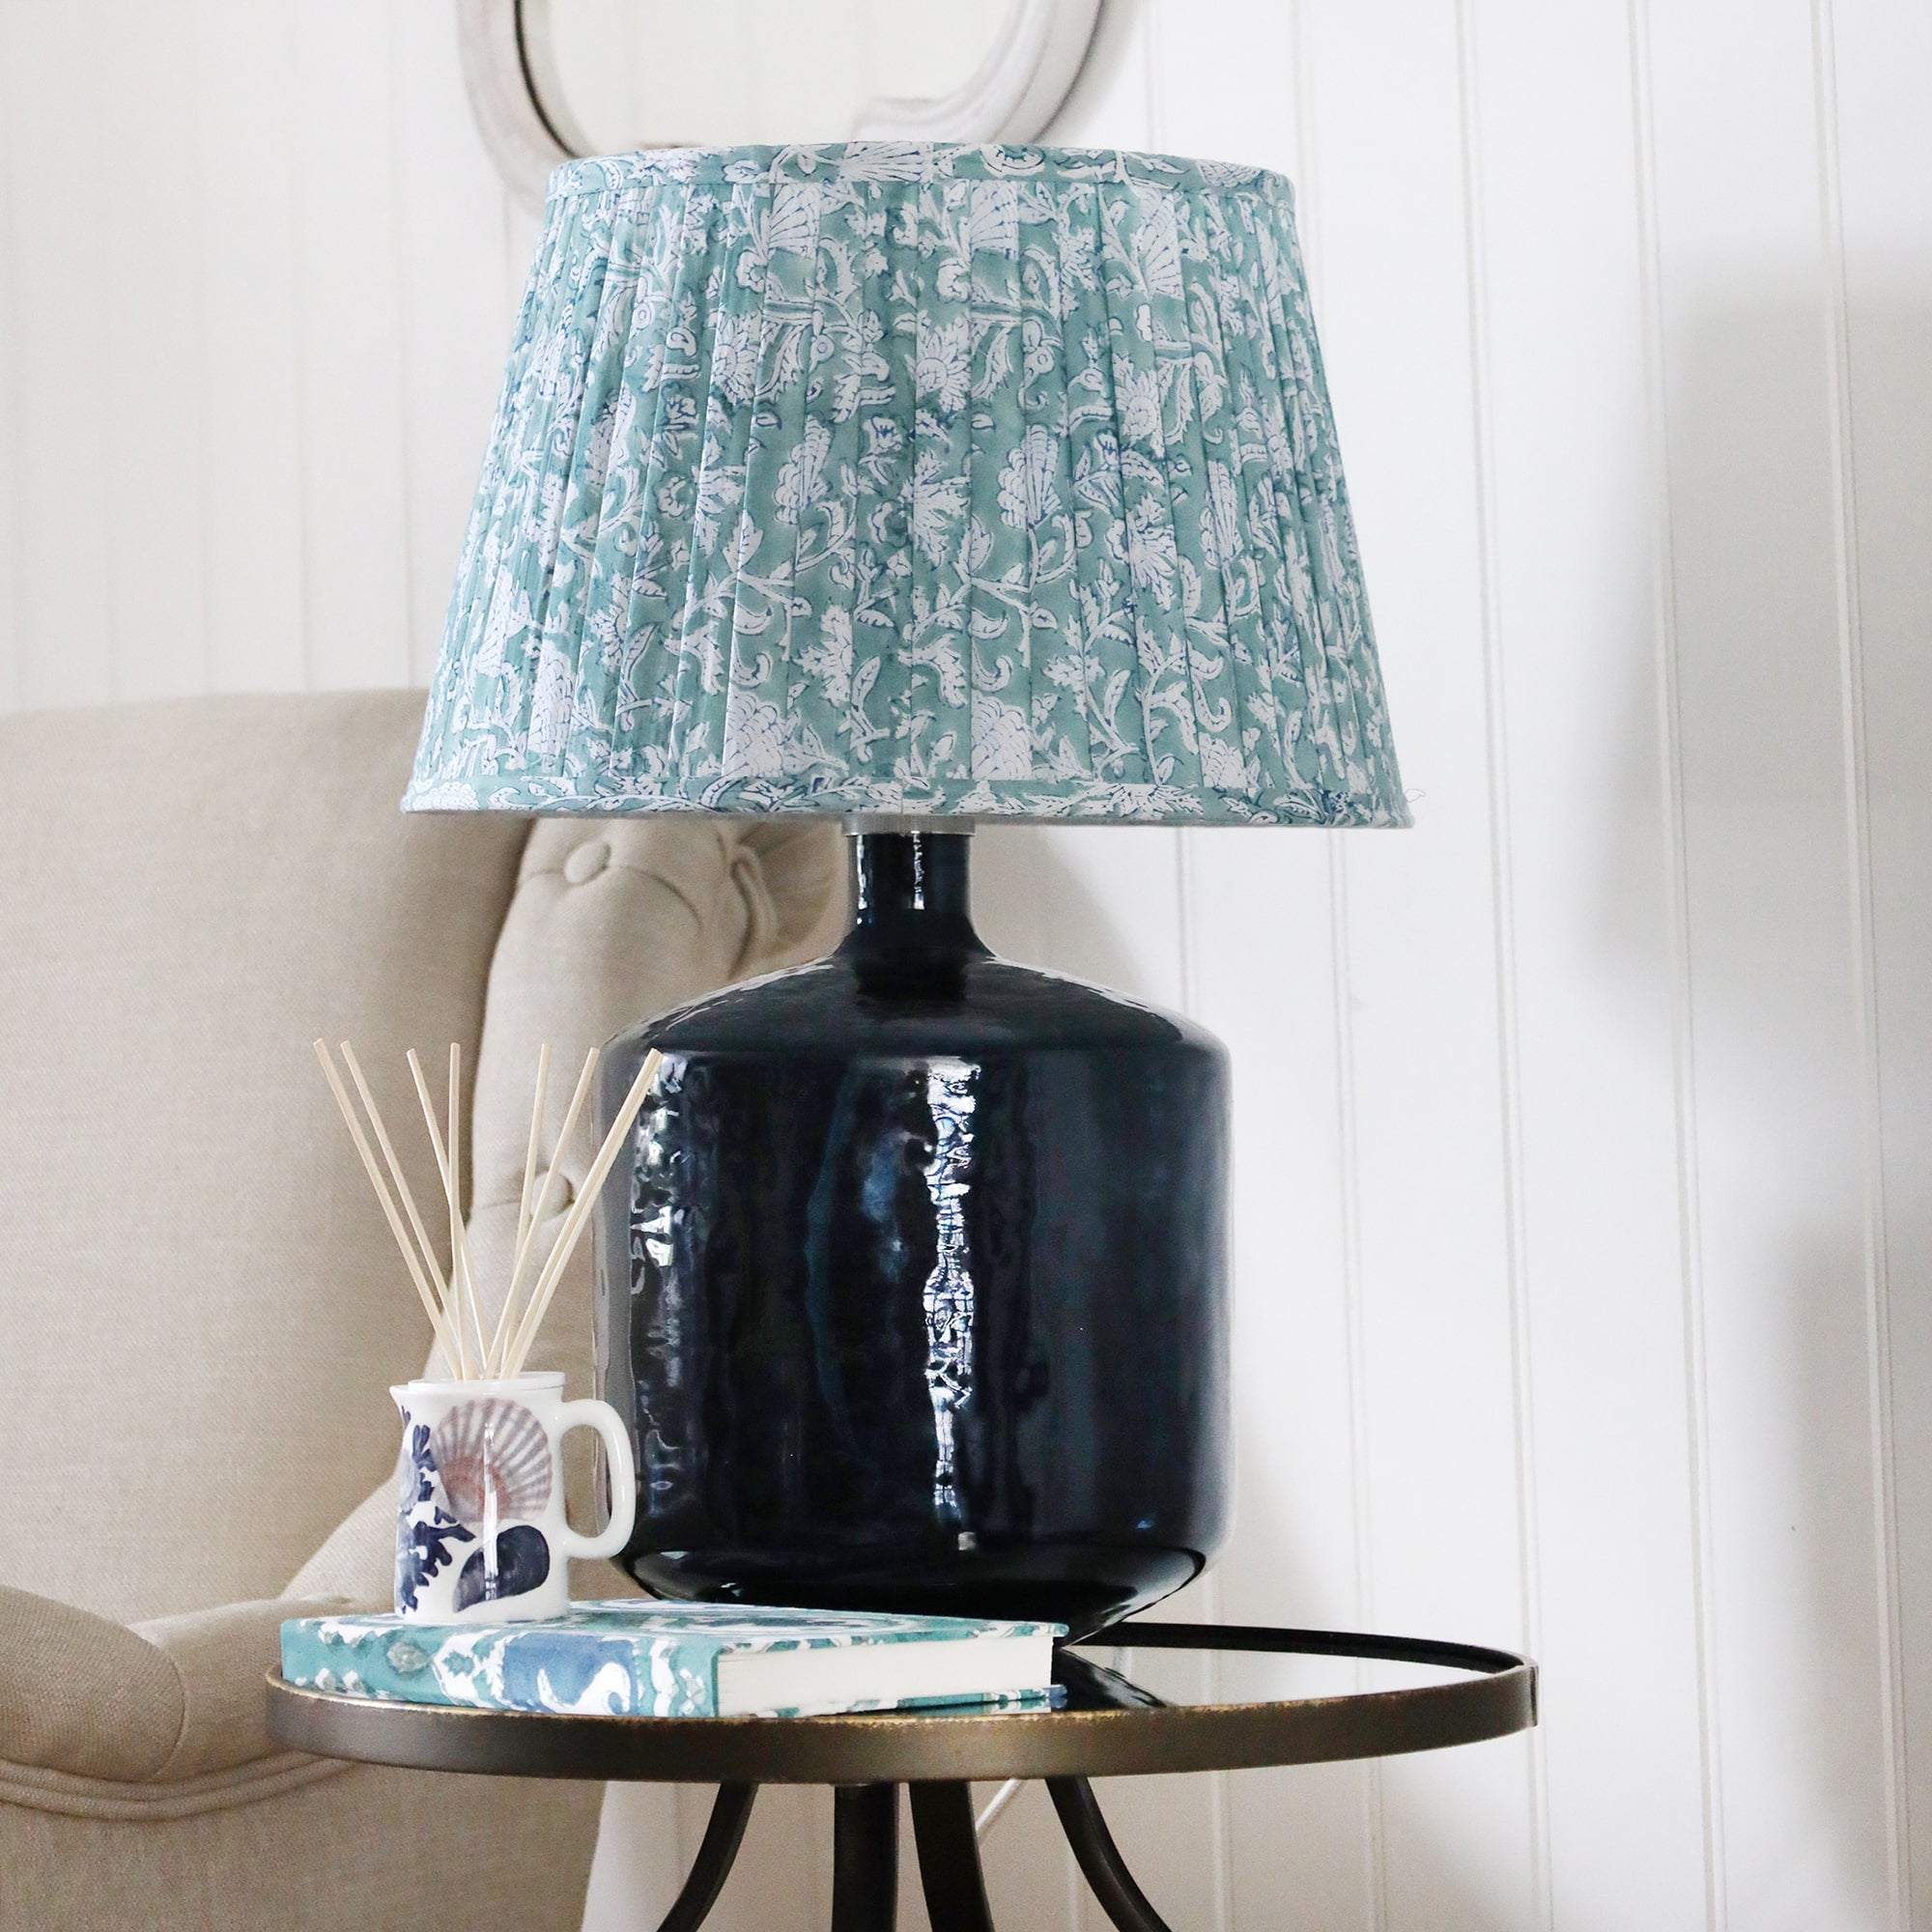 Zennor Glass lampbase with a pleated lampshade on a mirror table.On the table is a Beachcomber diffuser with a notebook.Next to the table is a chair, on the wall behind is a wave mirror.